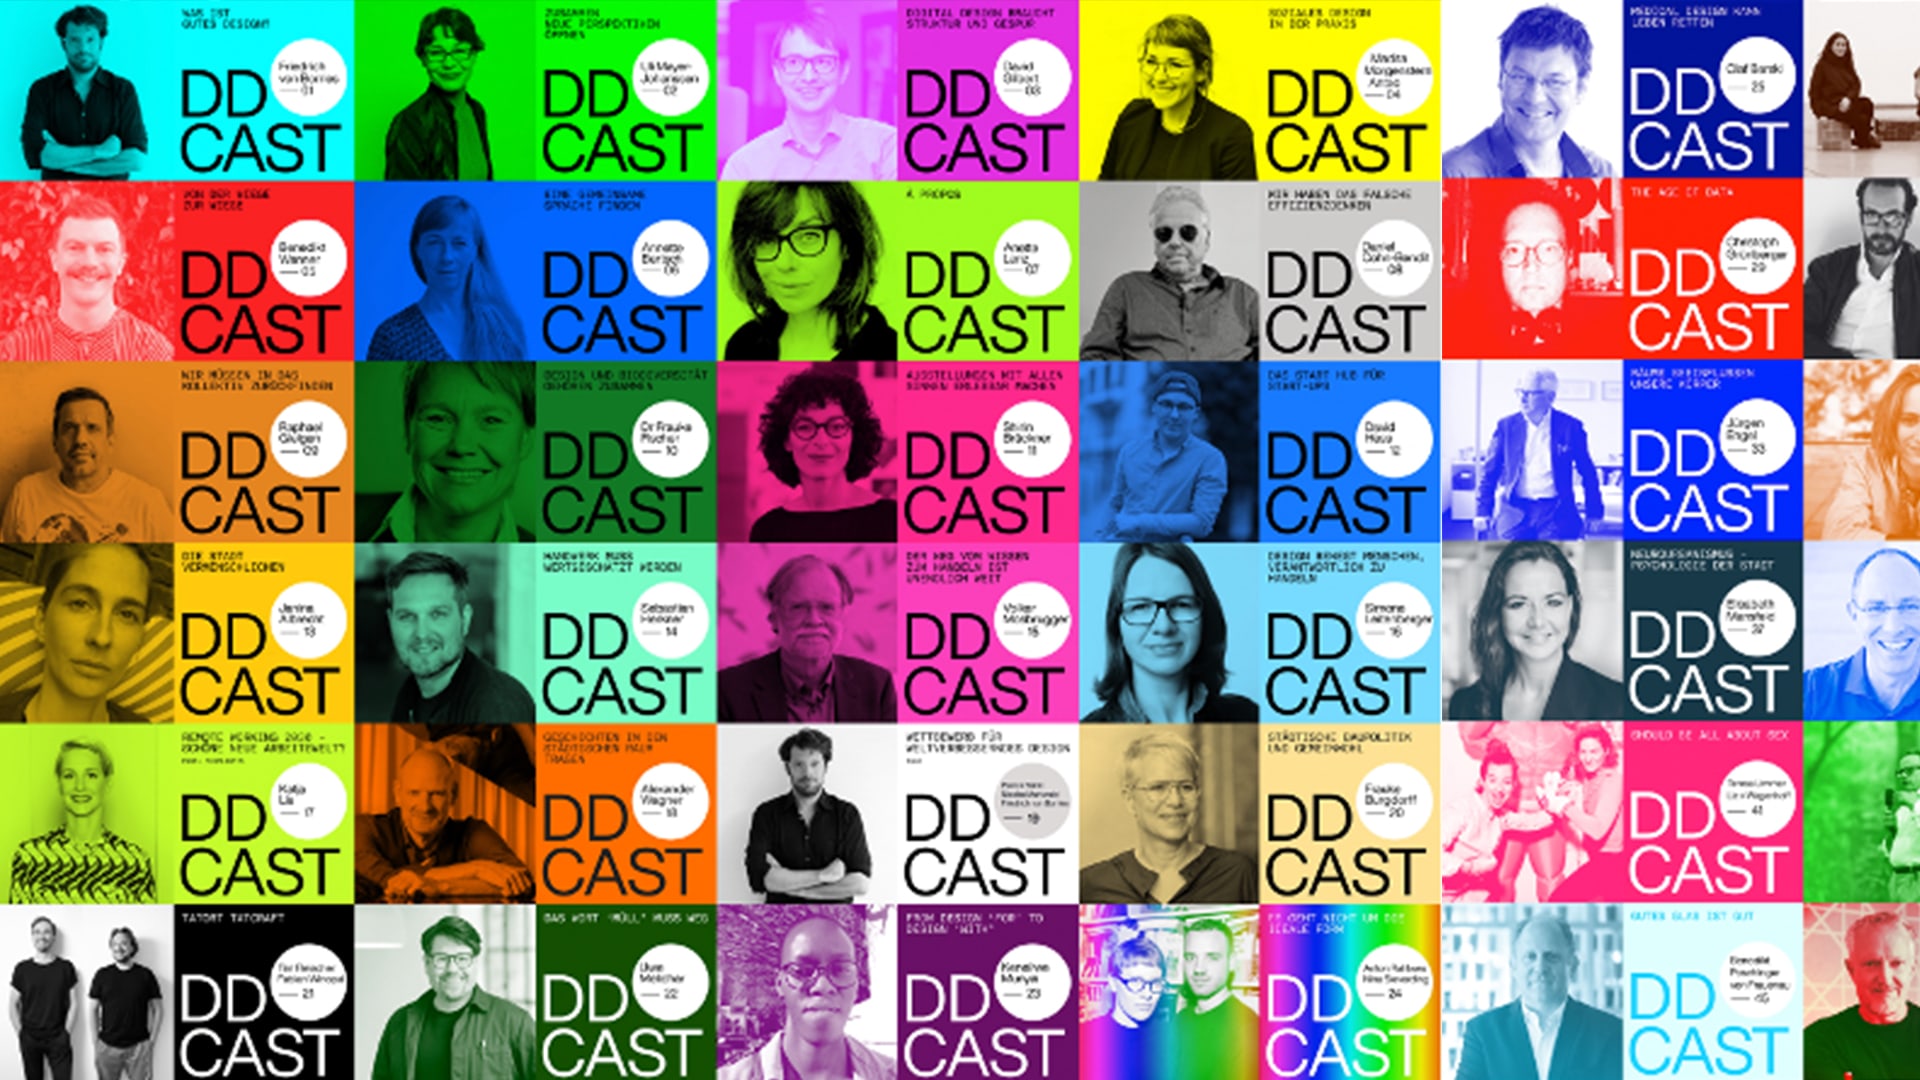 DDCAST